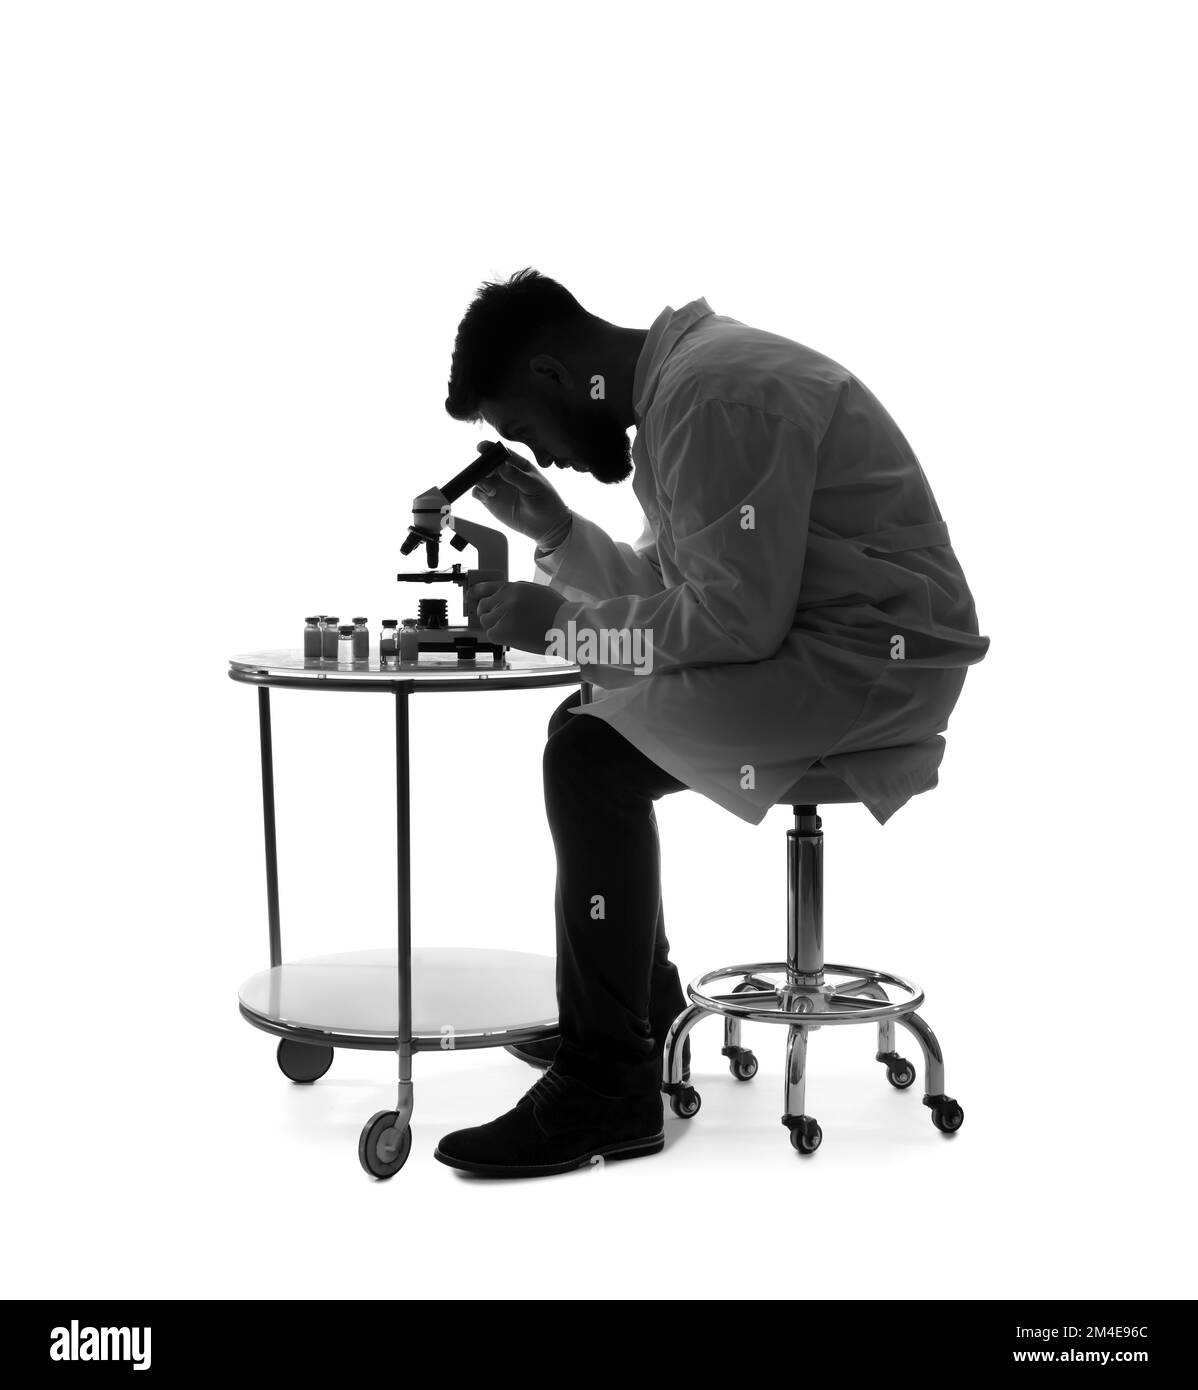 Silhouette of male scientist working with microscope on white background Stock Photo